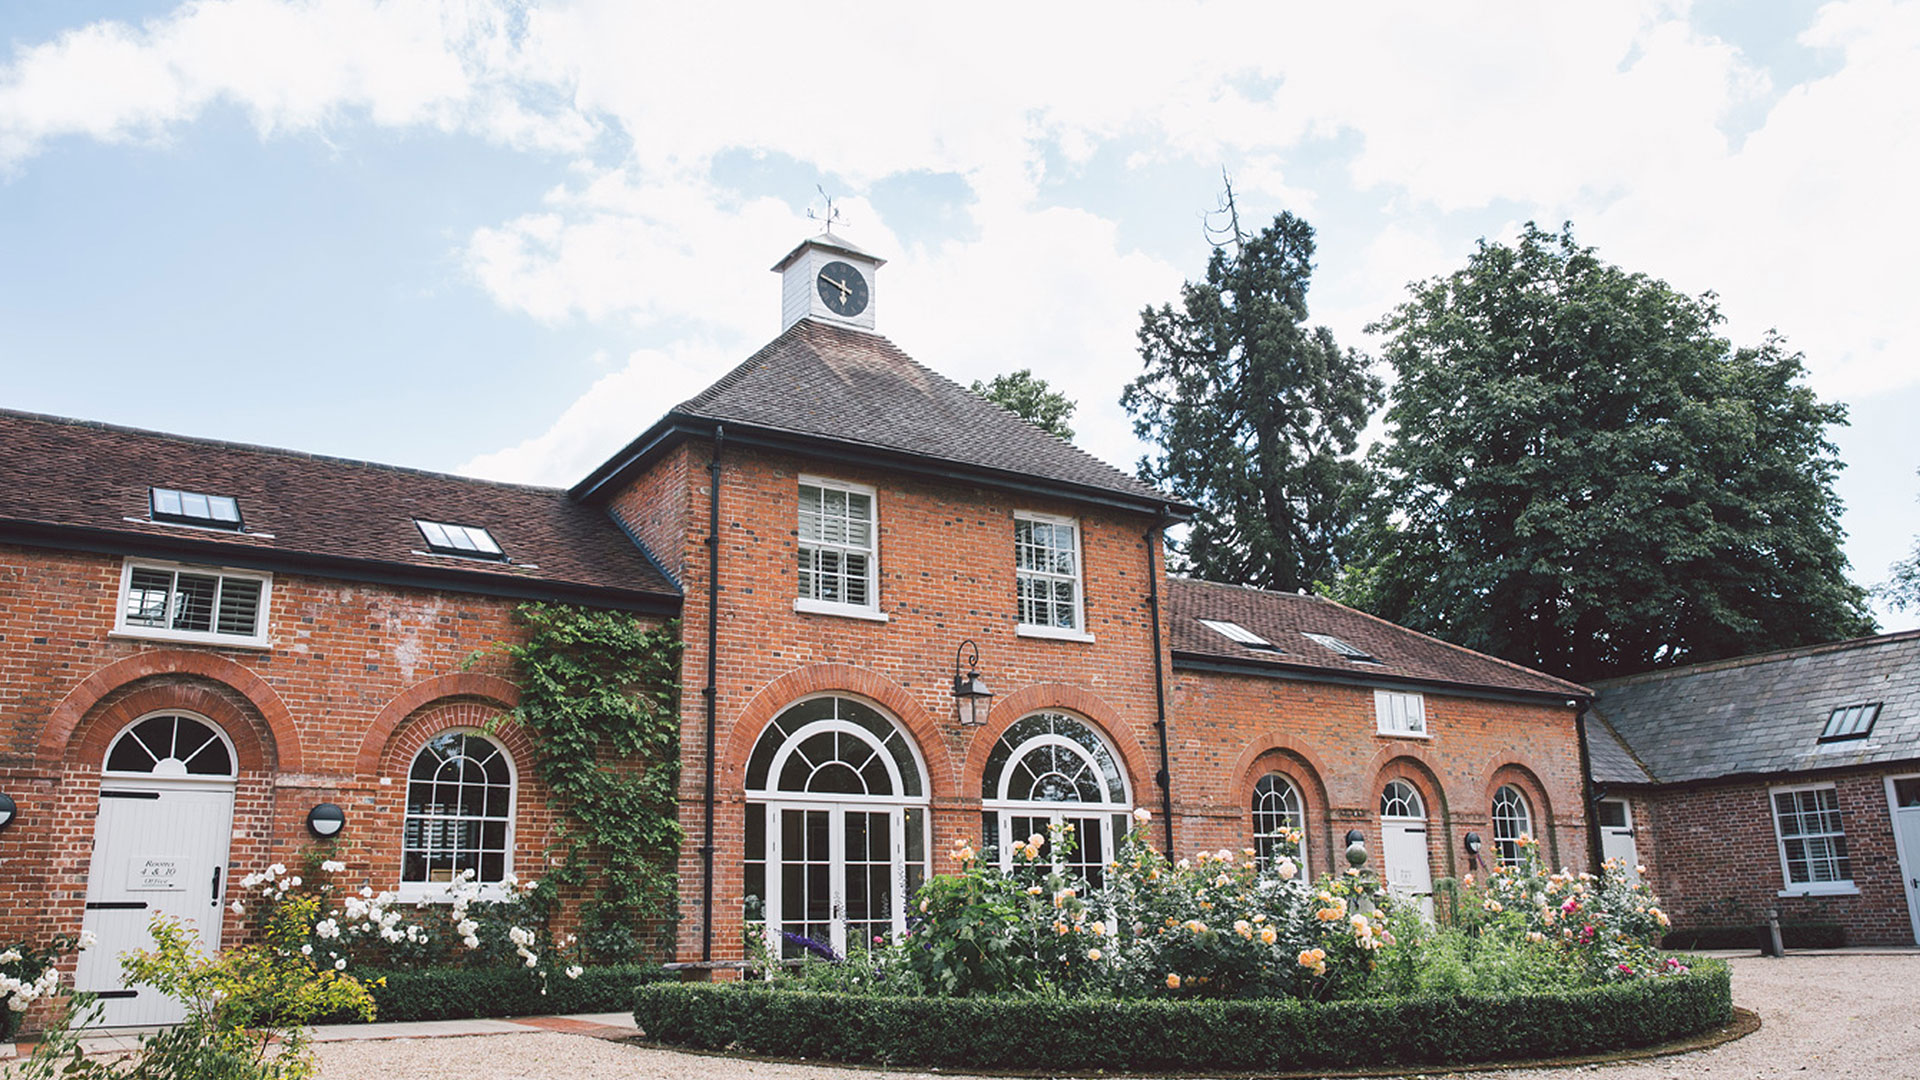 The Coach House offers accommodation for close family and friends - wedding accommodation Essex